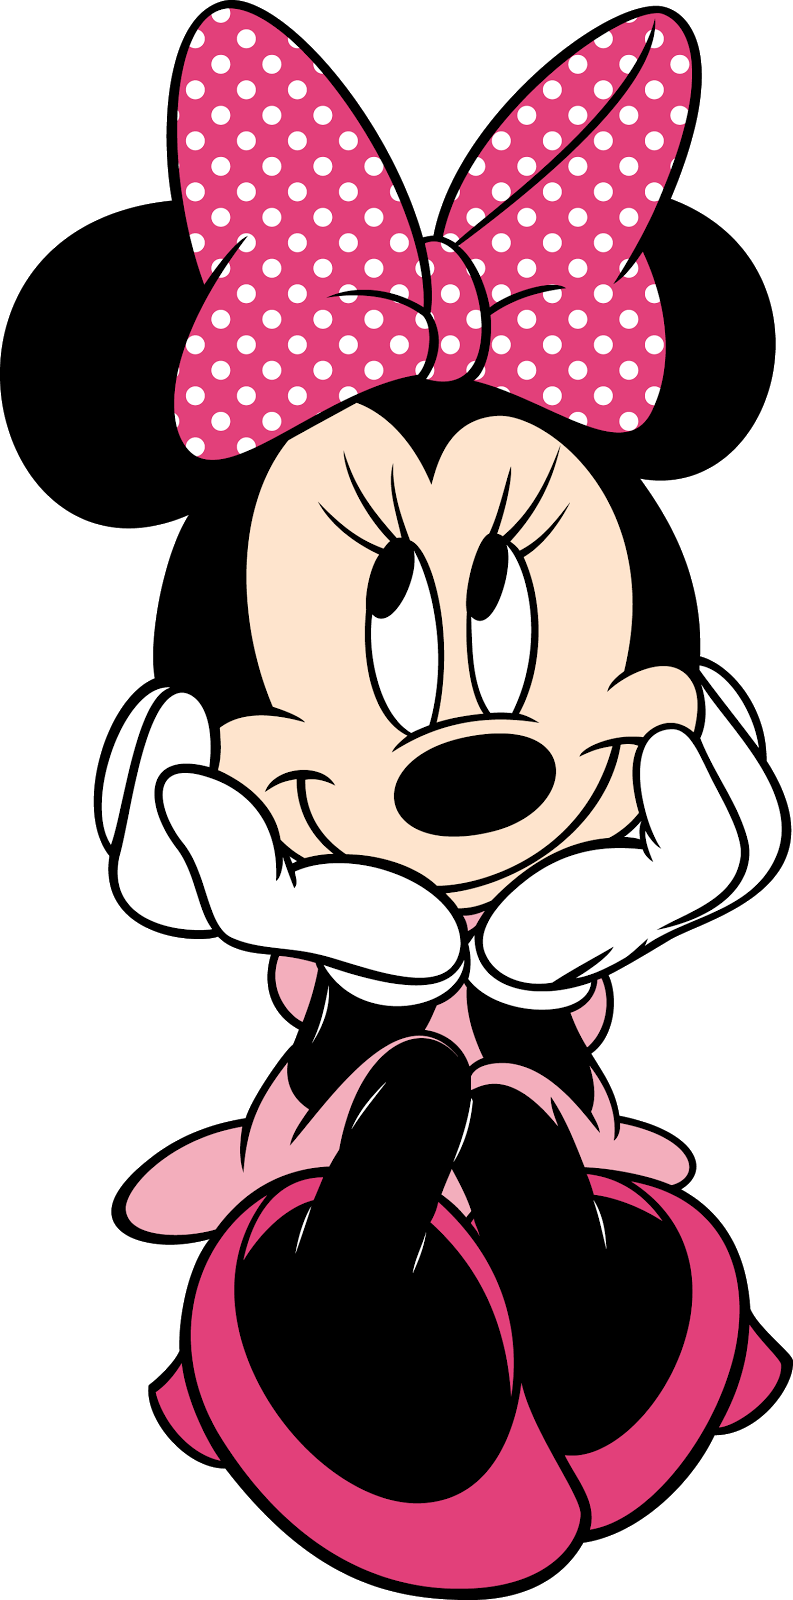 Cowgirl clipart minnie mouse. Panda free images baby